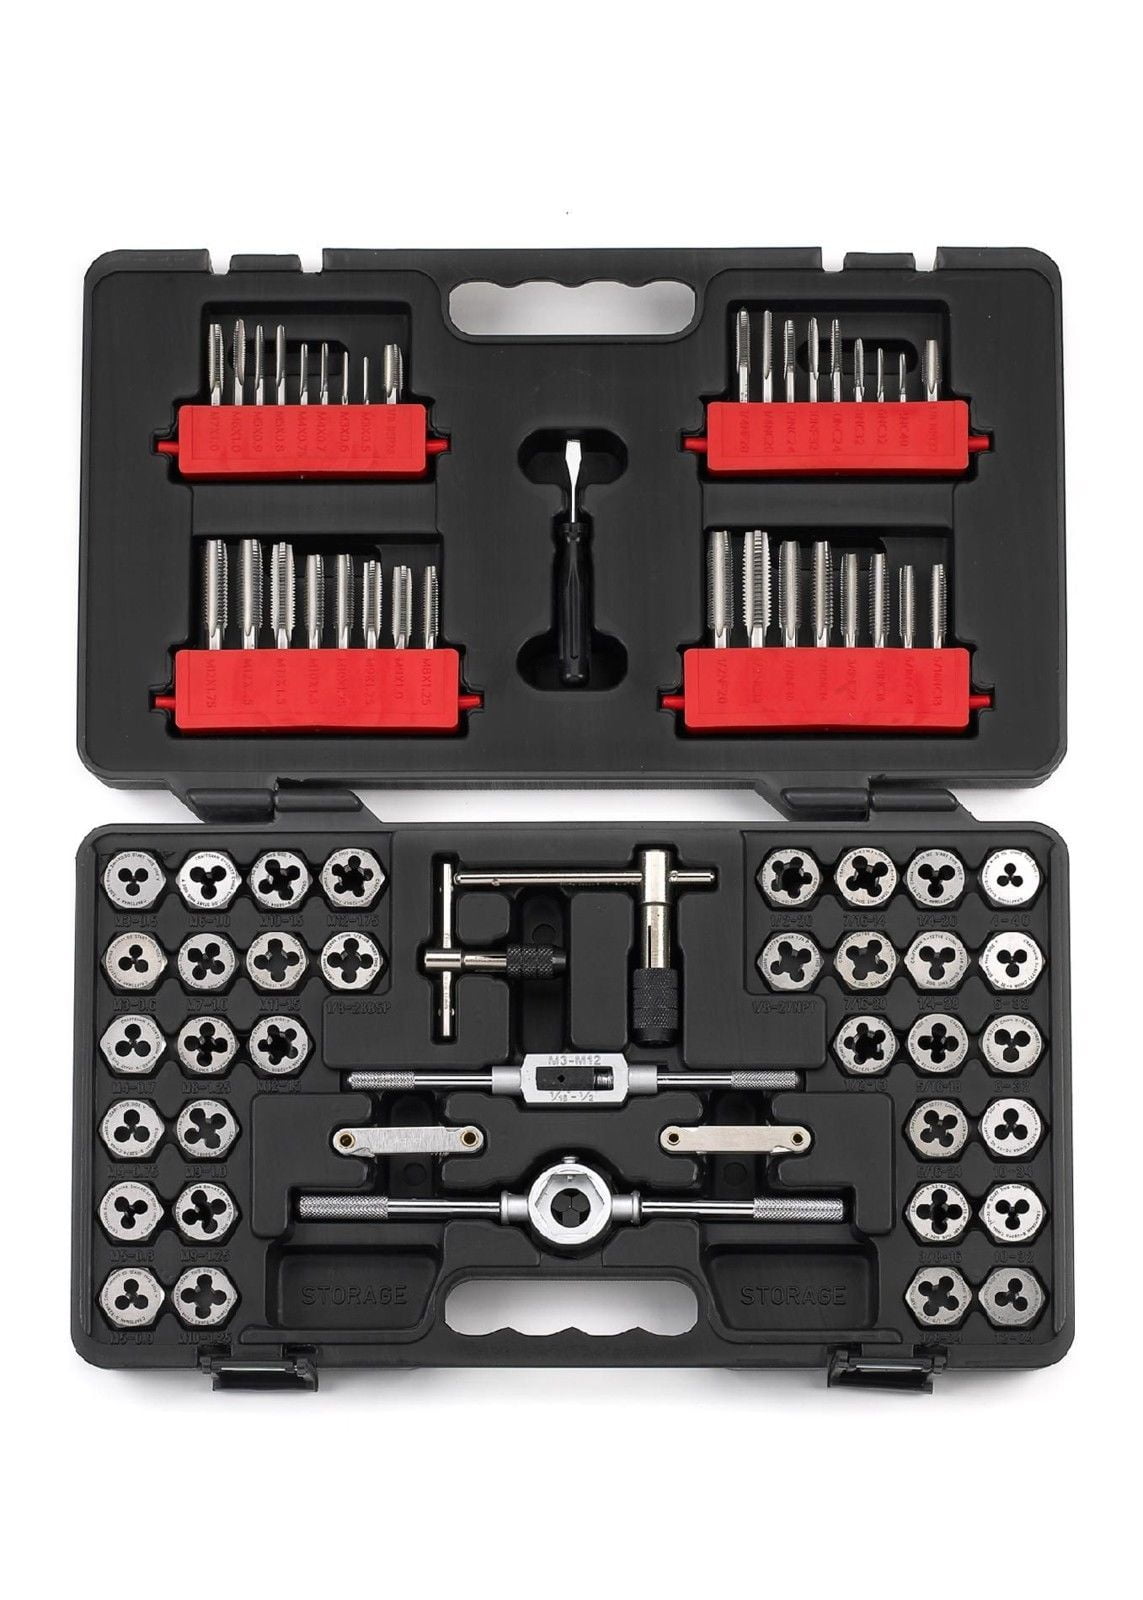 86 PC PIECE TUNGSTEN STEEL MM & SAE SIZE INCH STEEL TAP & AND DIE TOOL SET KIT 